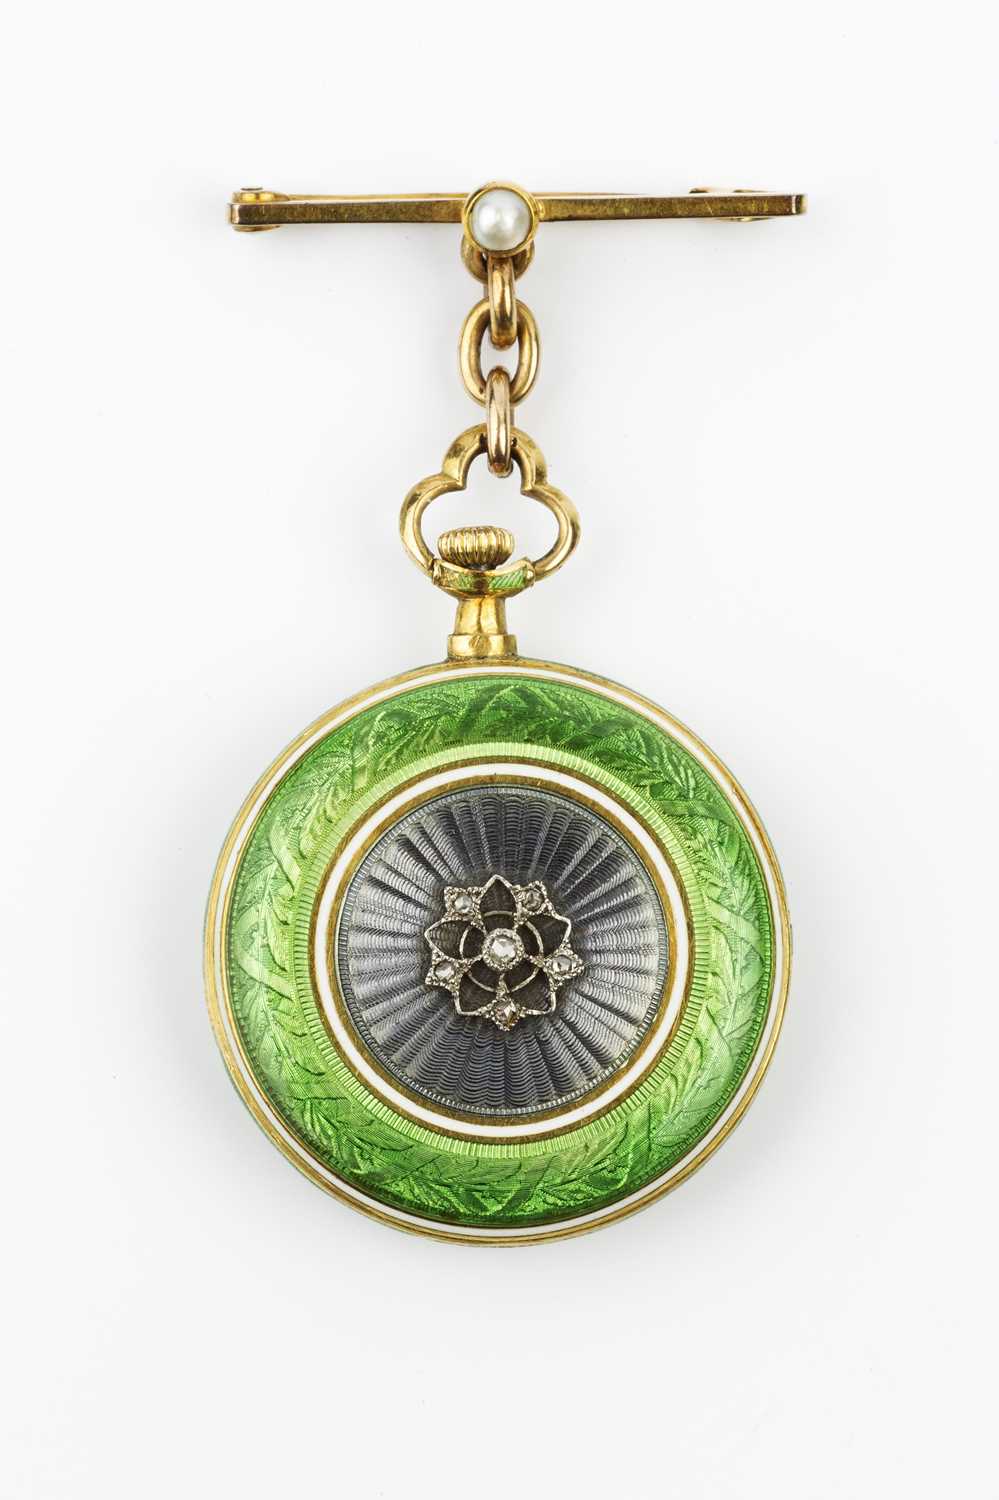 An early 20th century enamel and diamond set fob watch, the circular silvered dial with stylized